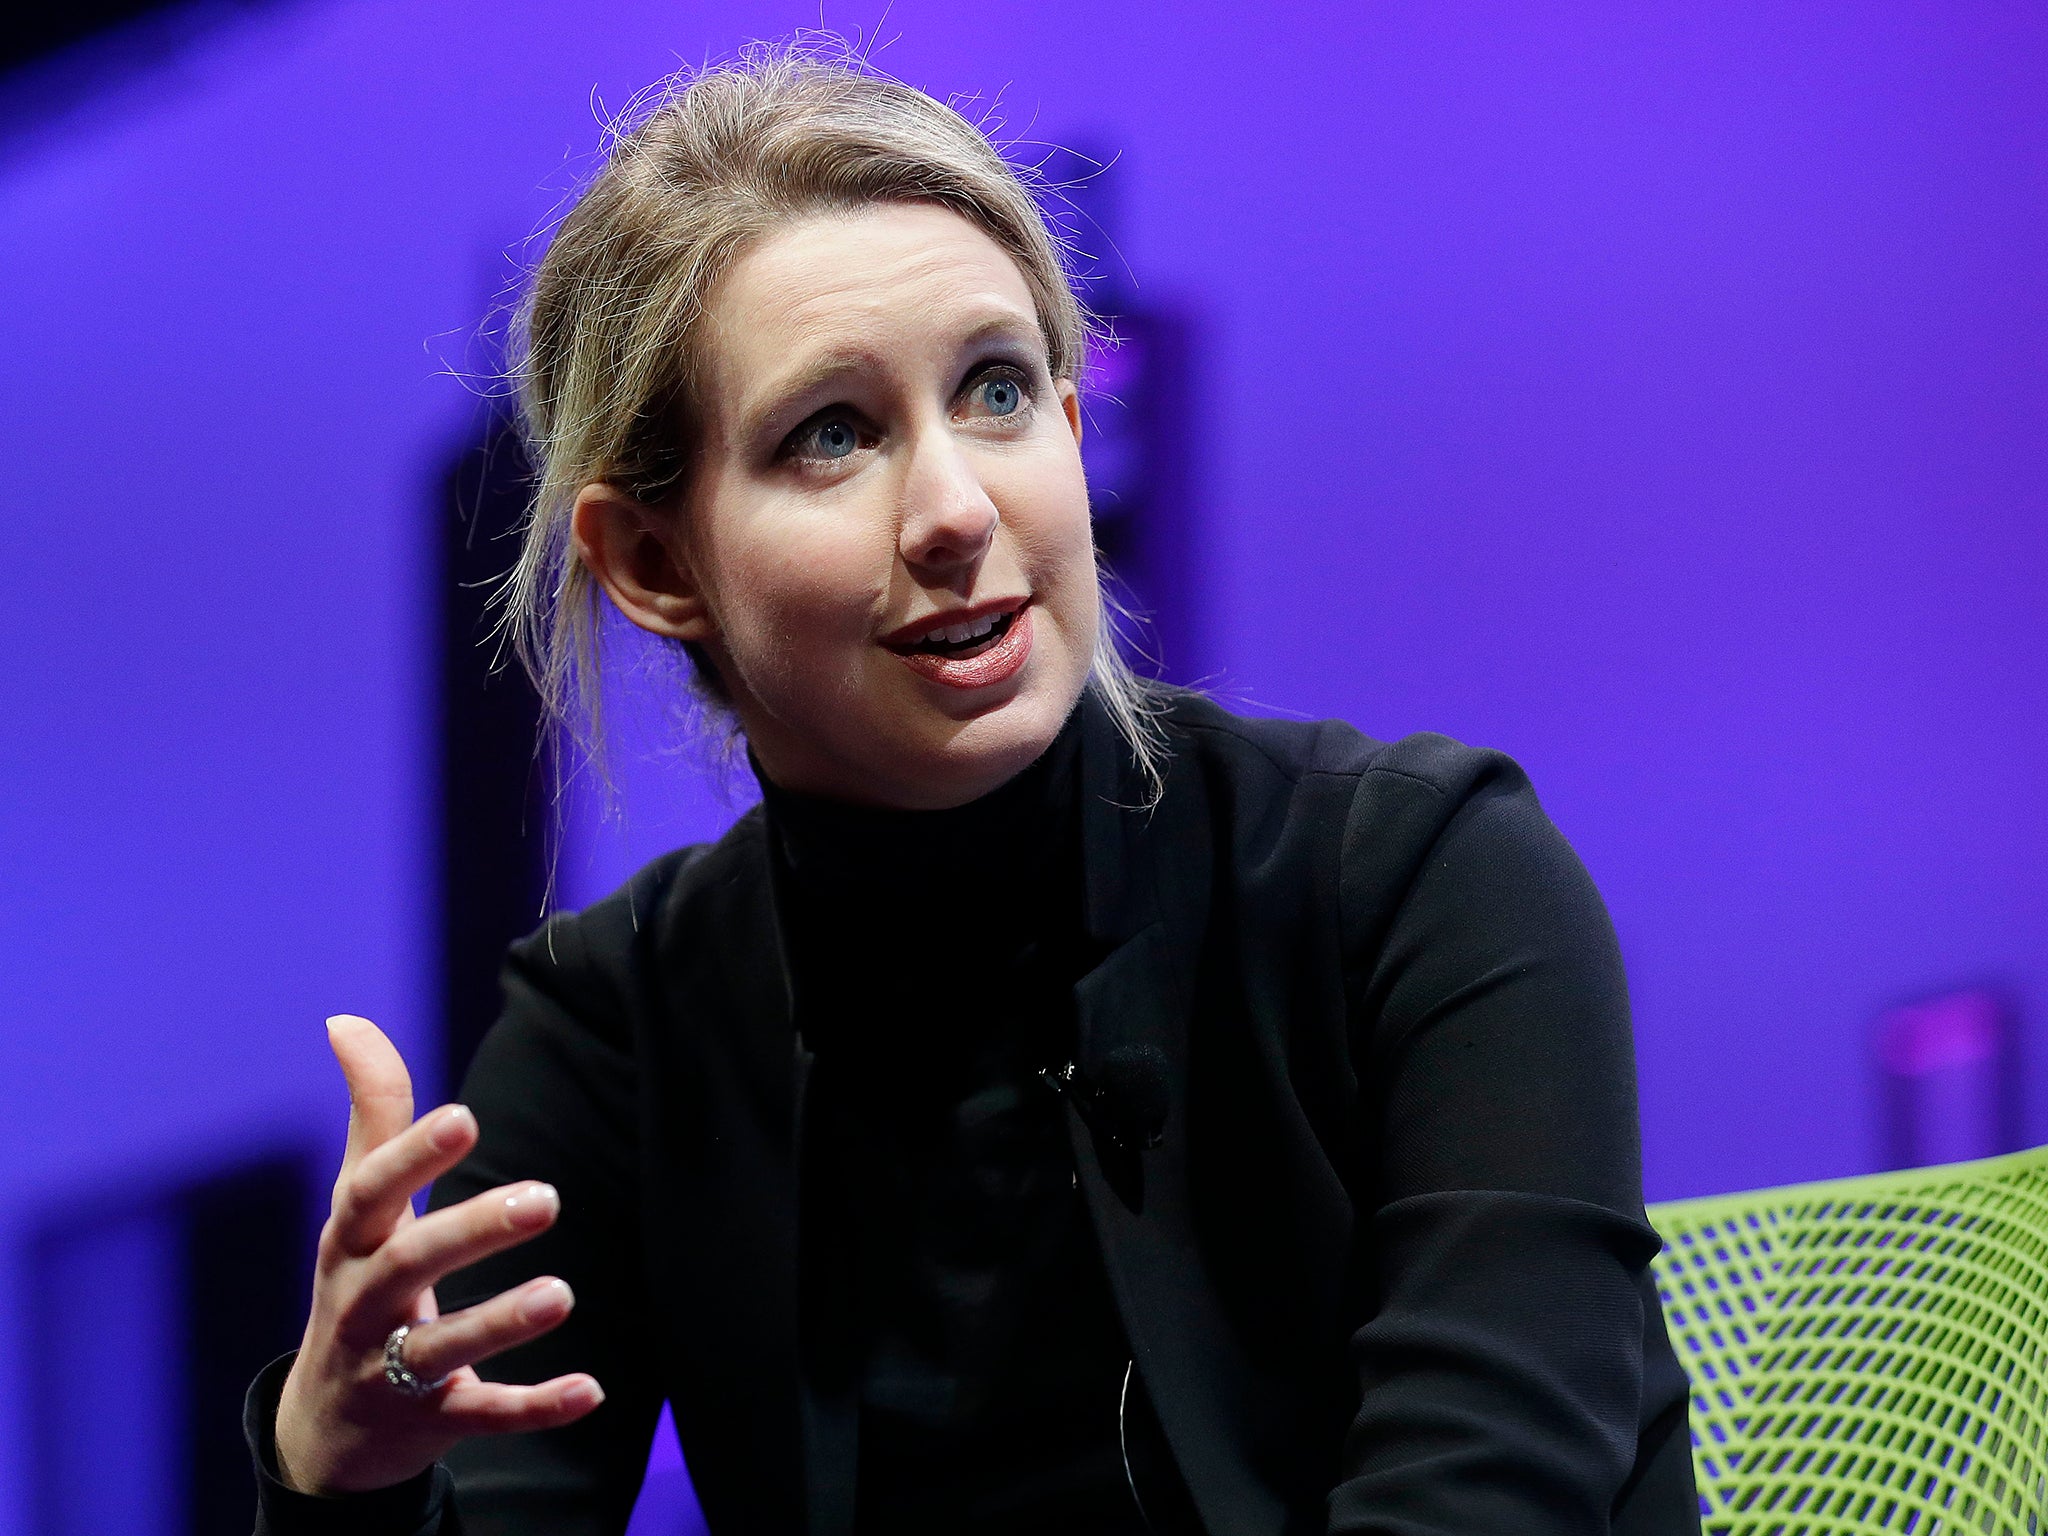 Ms Holmes had claimed Theranos' analyser could run dozens of diagnostic tests on just a single drop of blood